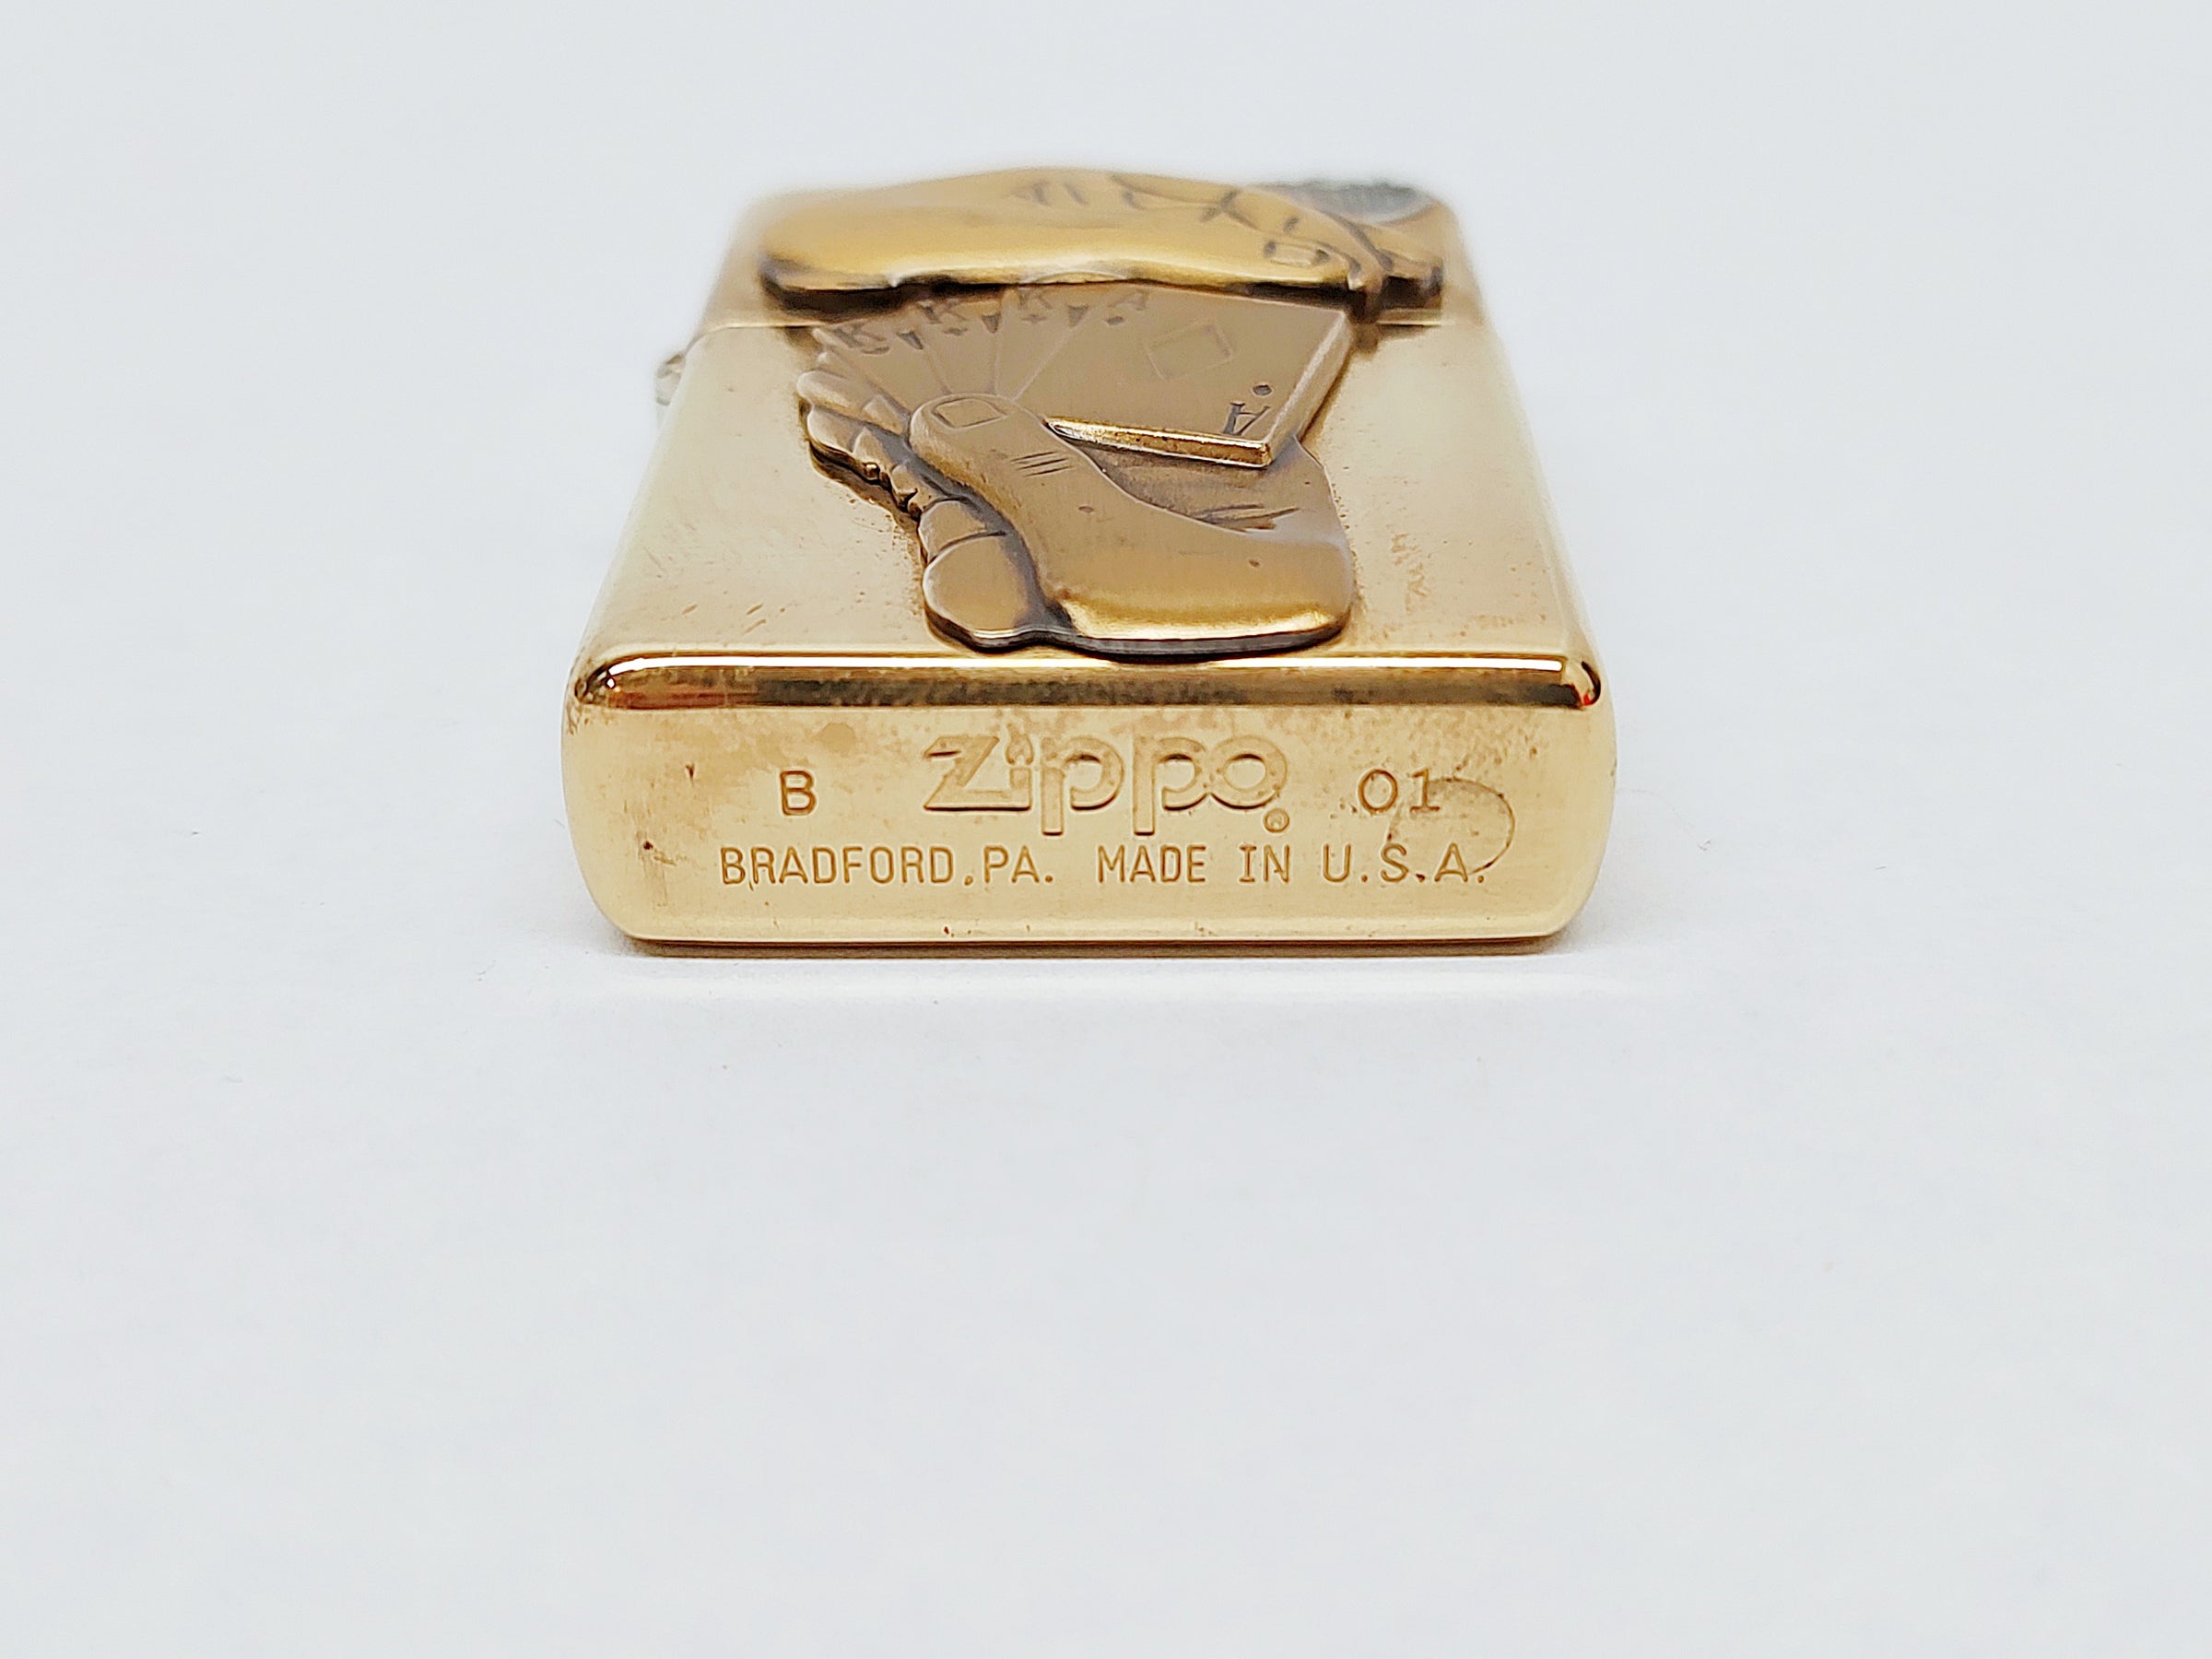 New 2001 Solid Brass Full House Hidden Ace Zippo Lighter - Hers and His Treasures